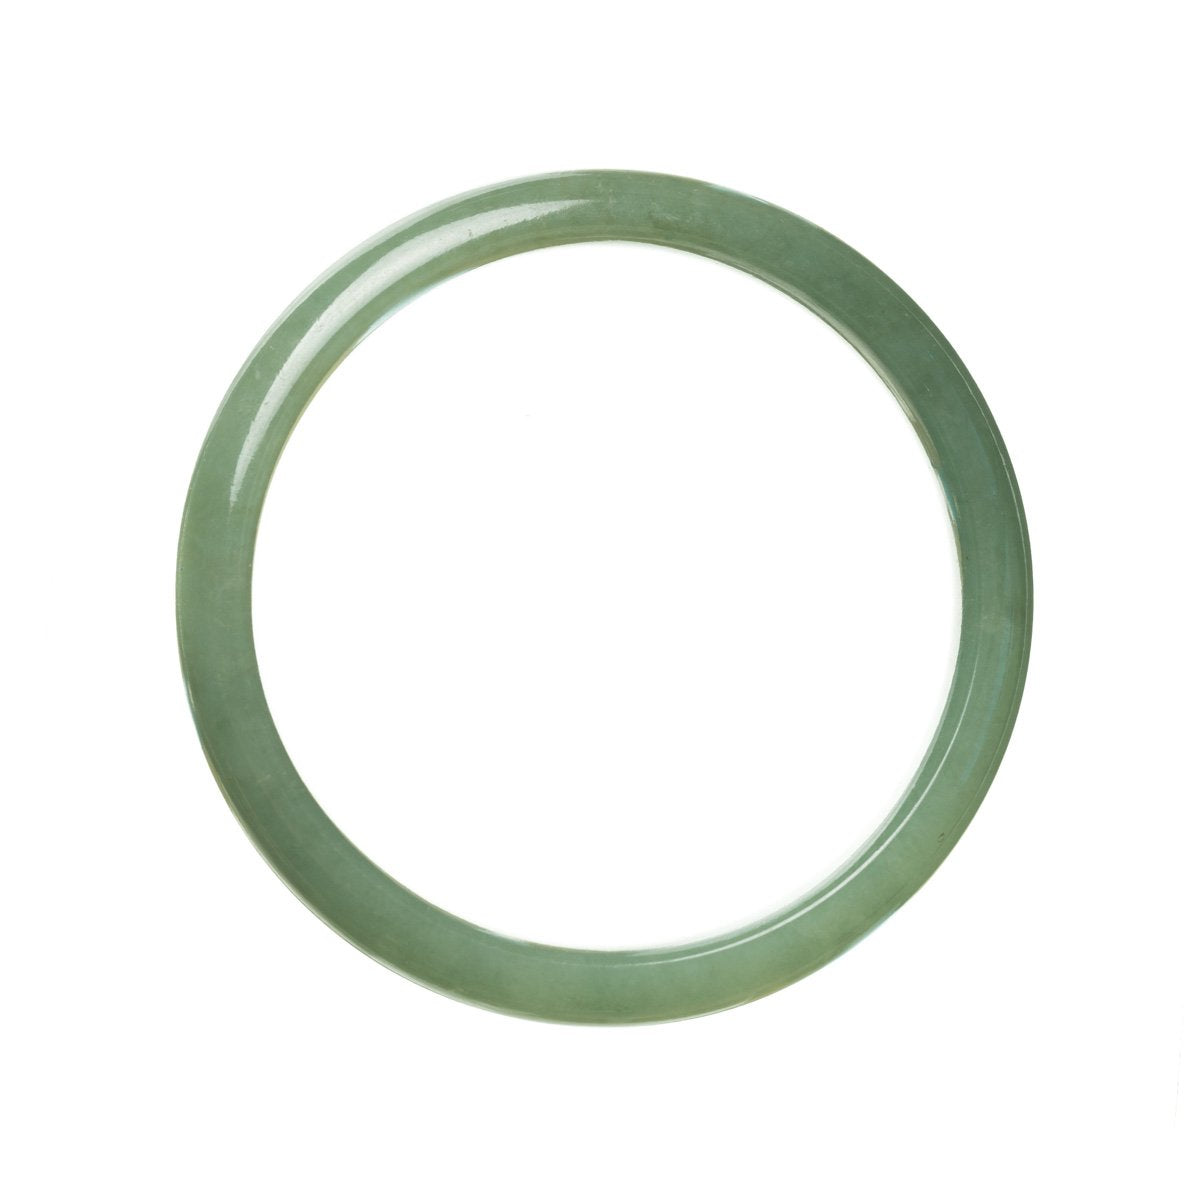 A close-up photo of a beautiful green jadeite bracelet, showcasing its semi-round shape and smooth texture. The bracelet is made of genuine Grade A jadeite, measuring 59mm in size. A luxurious jewelry piece by MAYS™.